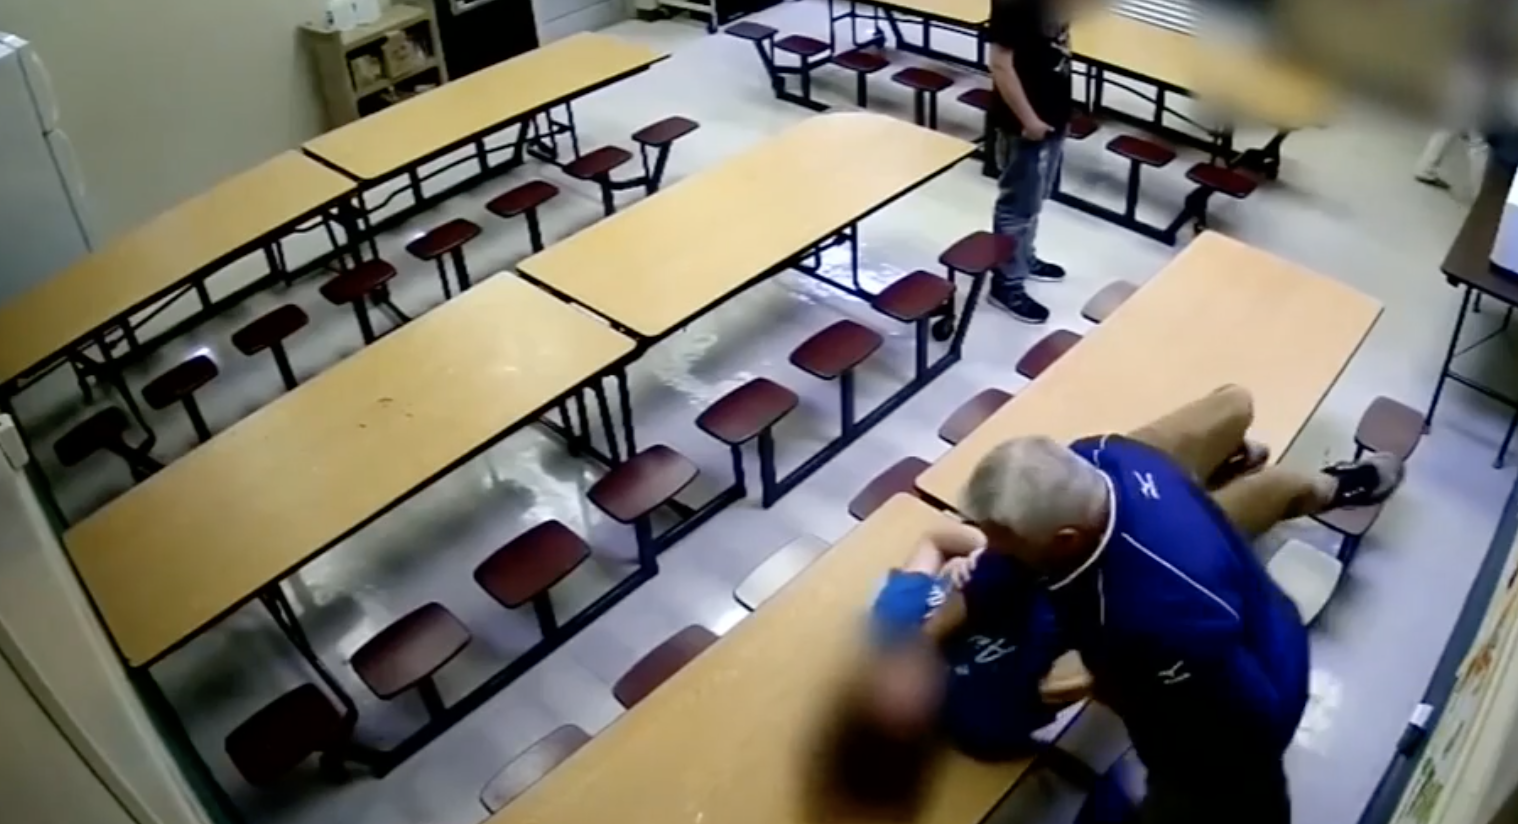 https://www.wlwt.com/article/video-teacher-grabs-student-by-throat-slams-him-onto-cafeteria-table/22710274